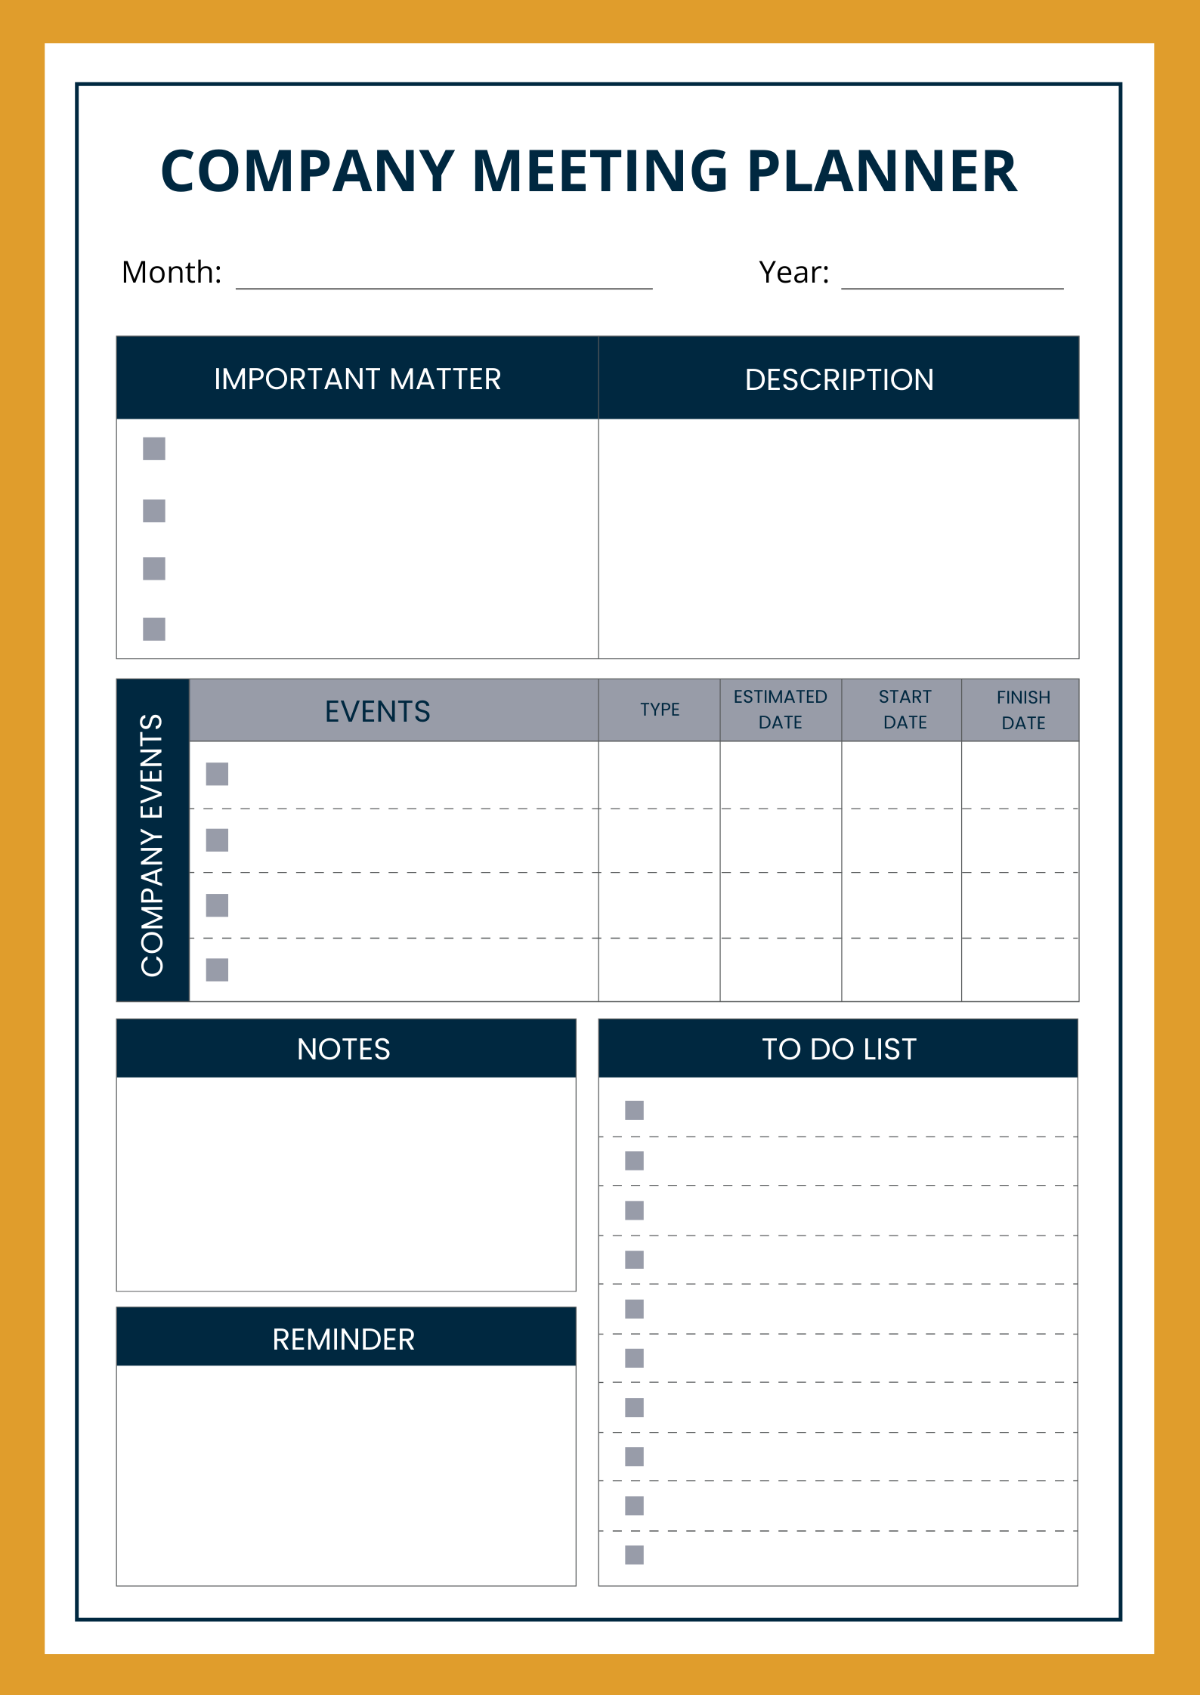 Company Meeting Planner Template